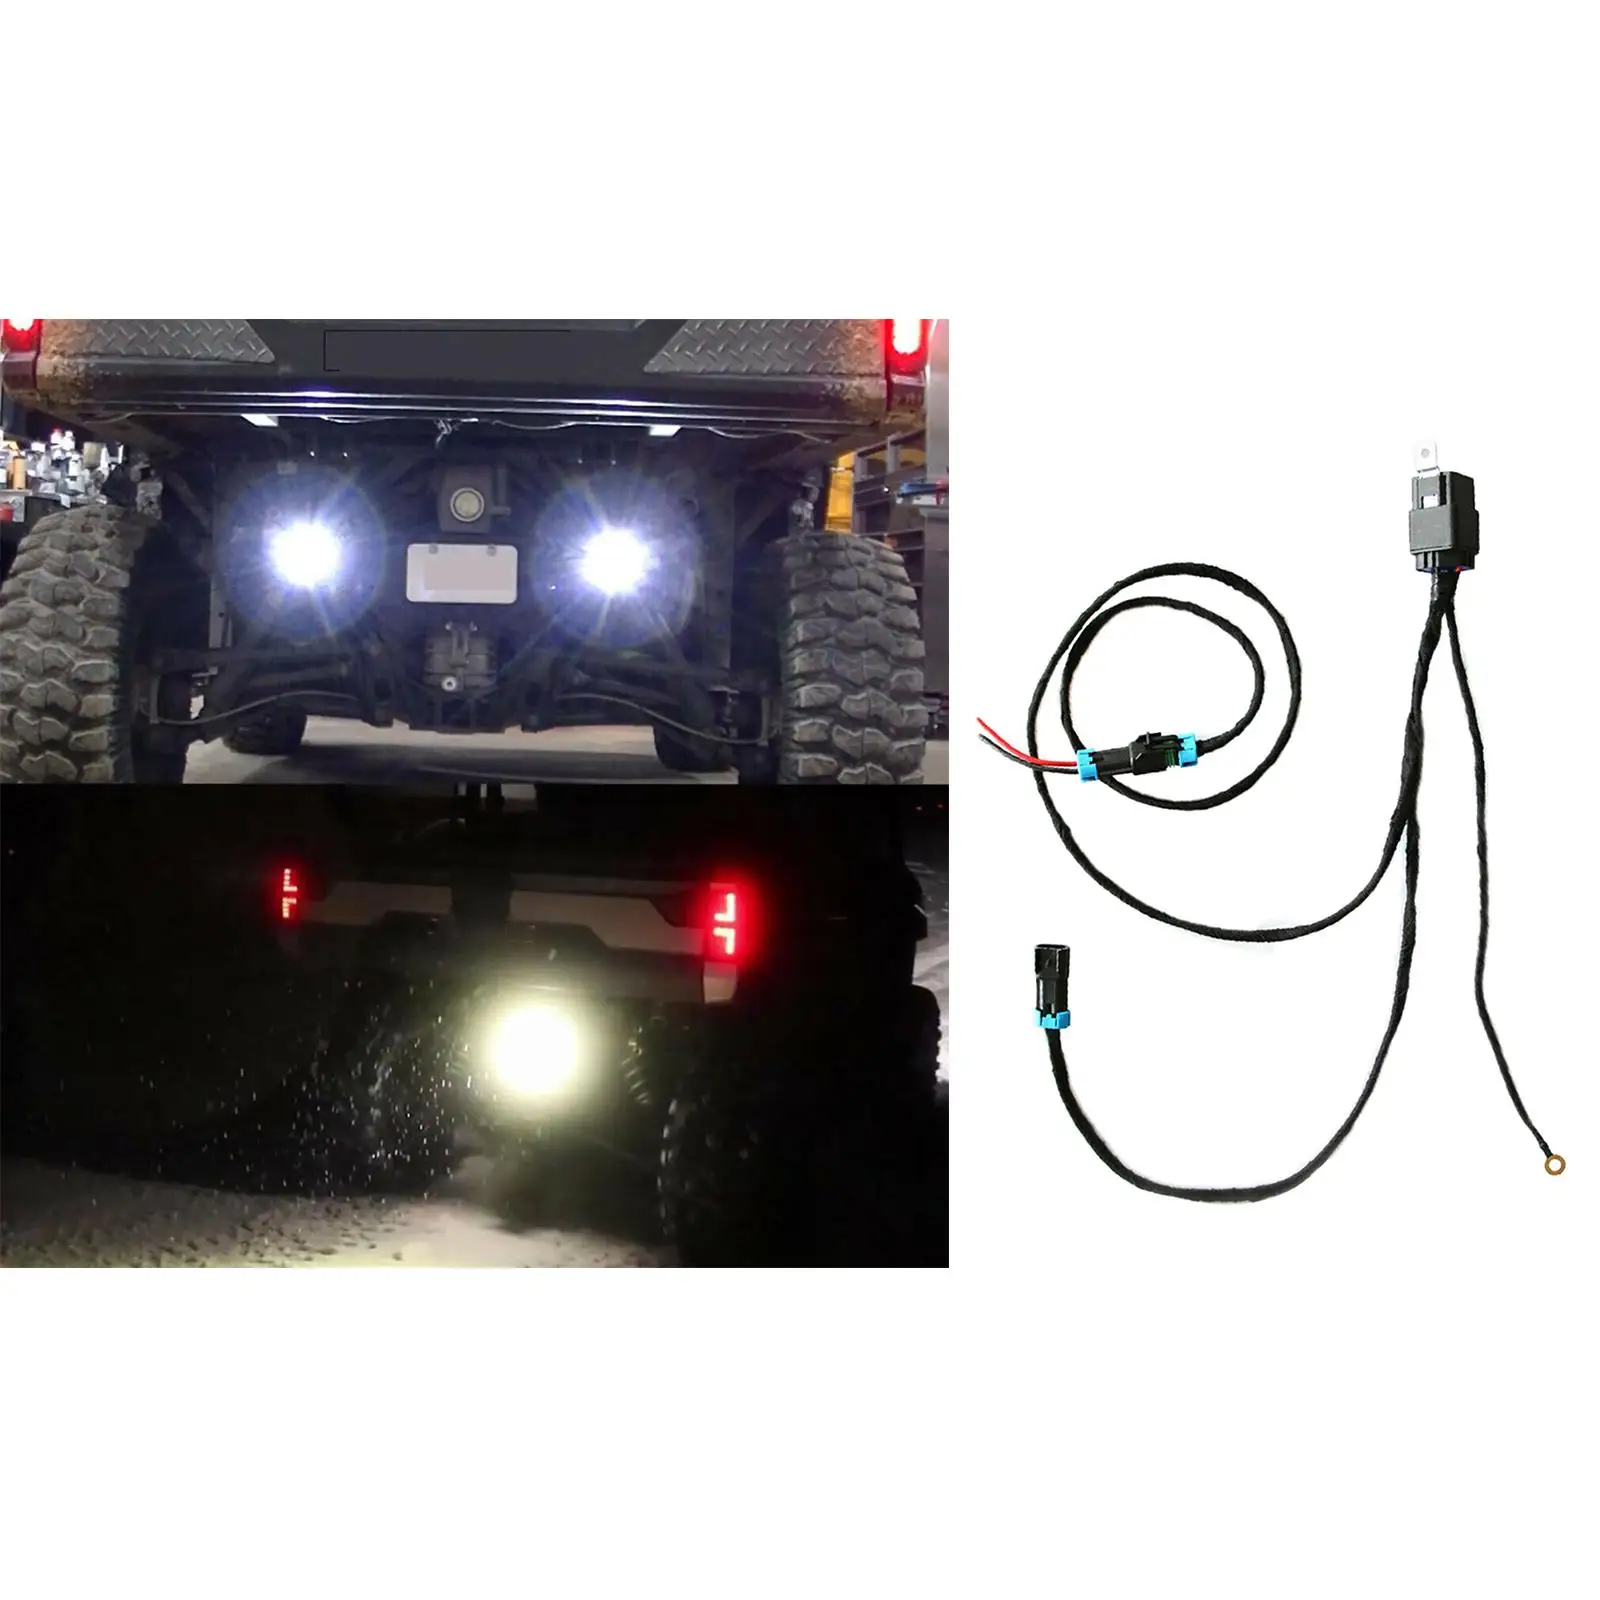 Reverse Light Harness for 2018-2020 Polaris Ranger 1000 / XP 1000 Premium 3-Seat and Crew, Auto Turn on in Reverse